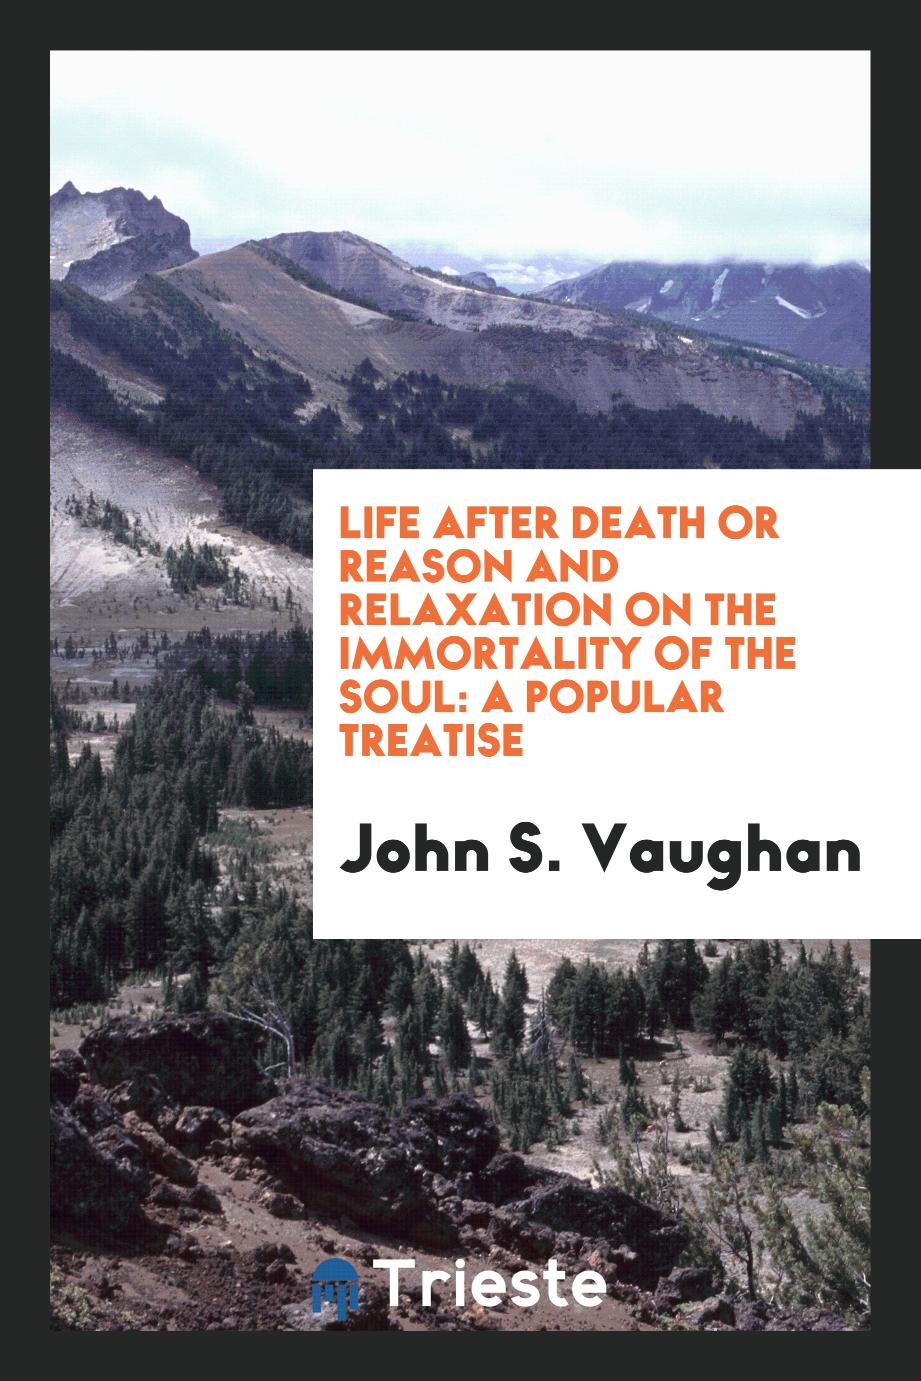 Life after death or reason and relaxation on the immortality of the soul: a popular treatise